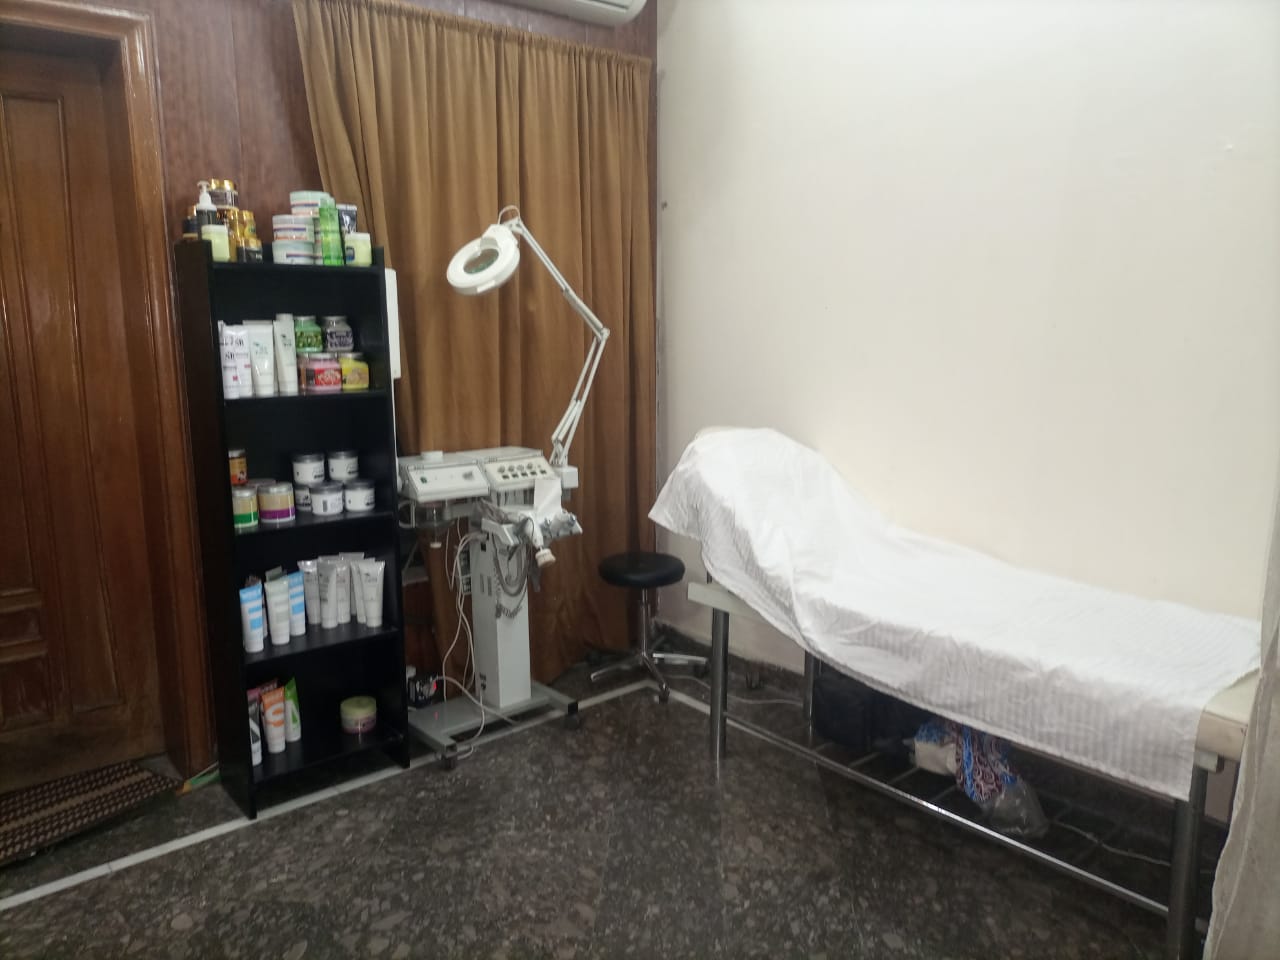 For your fresh look! 72% OFF, Rs 1999 Only for Whitening Facial + Whitening Bleach + Whitening Polisher + Neck Bleach with Polish + Whitening Manicure with Polisher + Whitening Pedicure with Polisher + Half Arm Wax + Half Legs Wax + Upper lips Forehead and Chin Threading by Mirrors Beauty Lounge, Wapda town, Lahore.